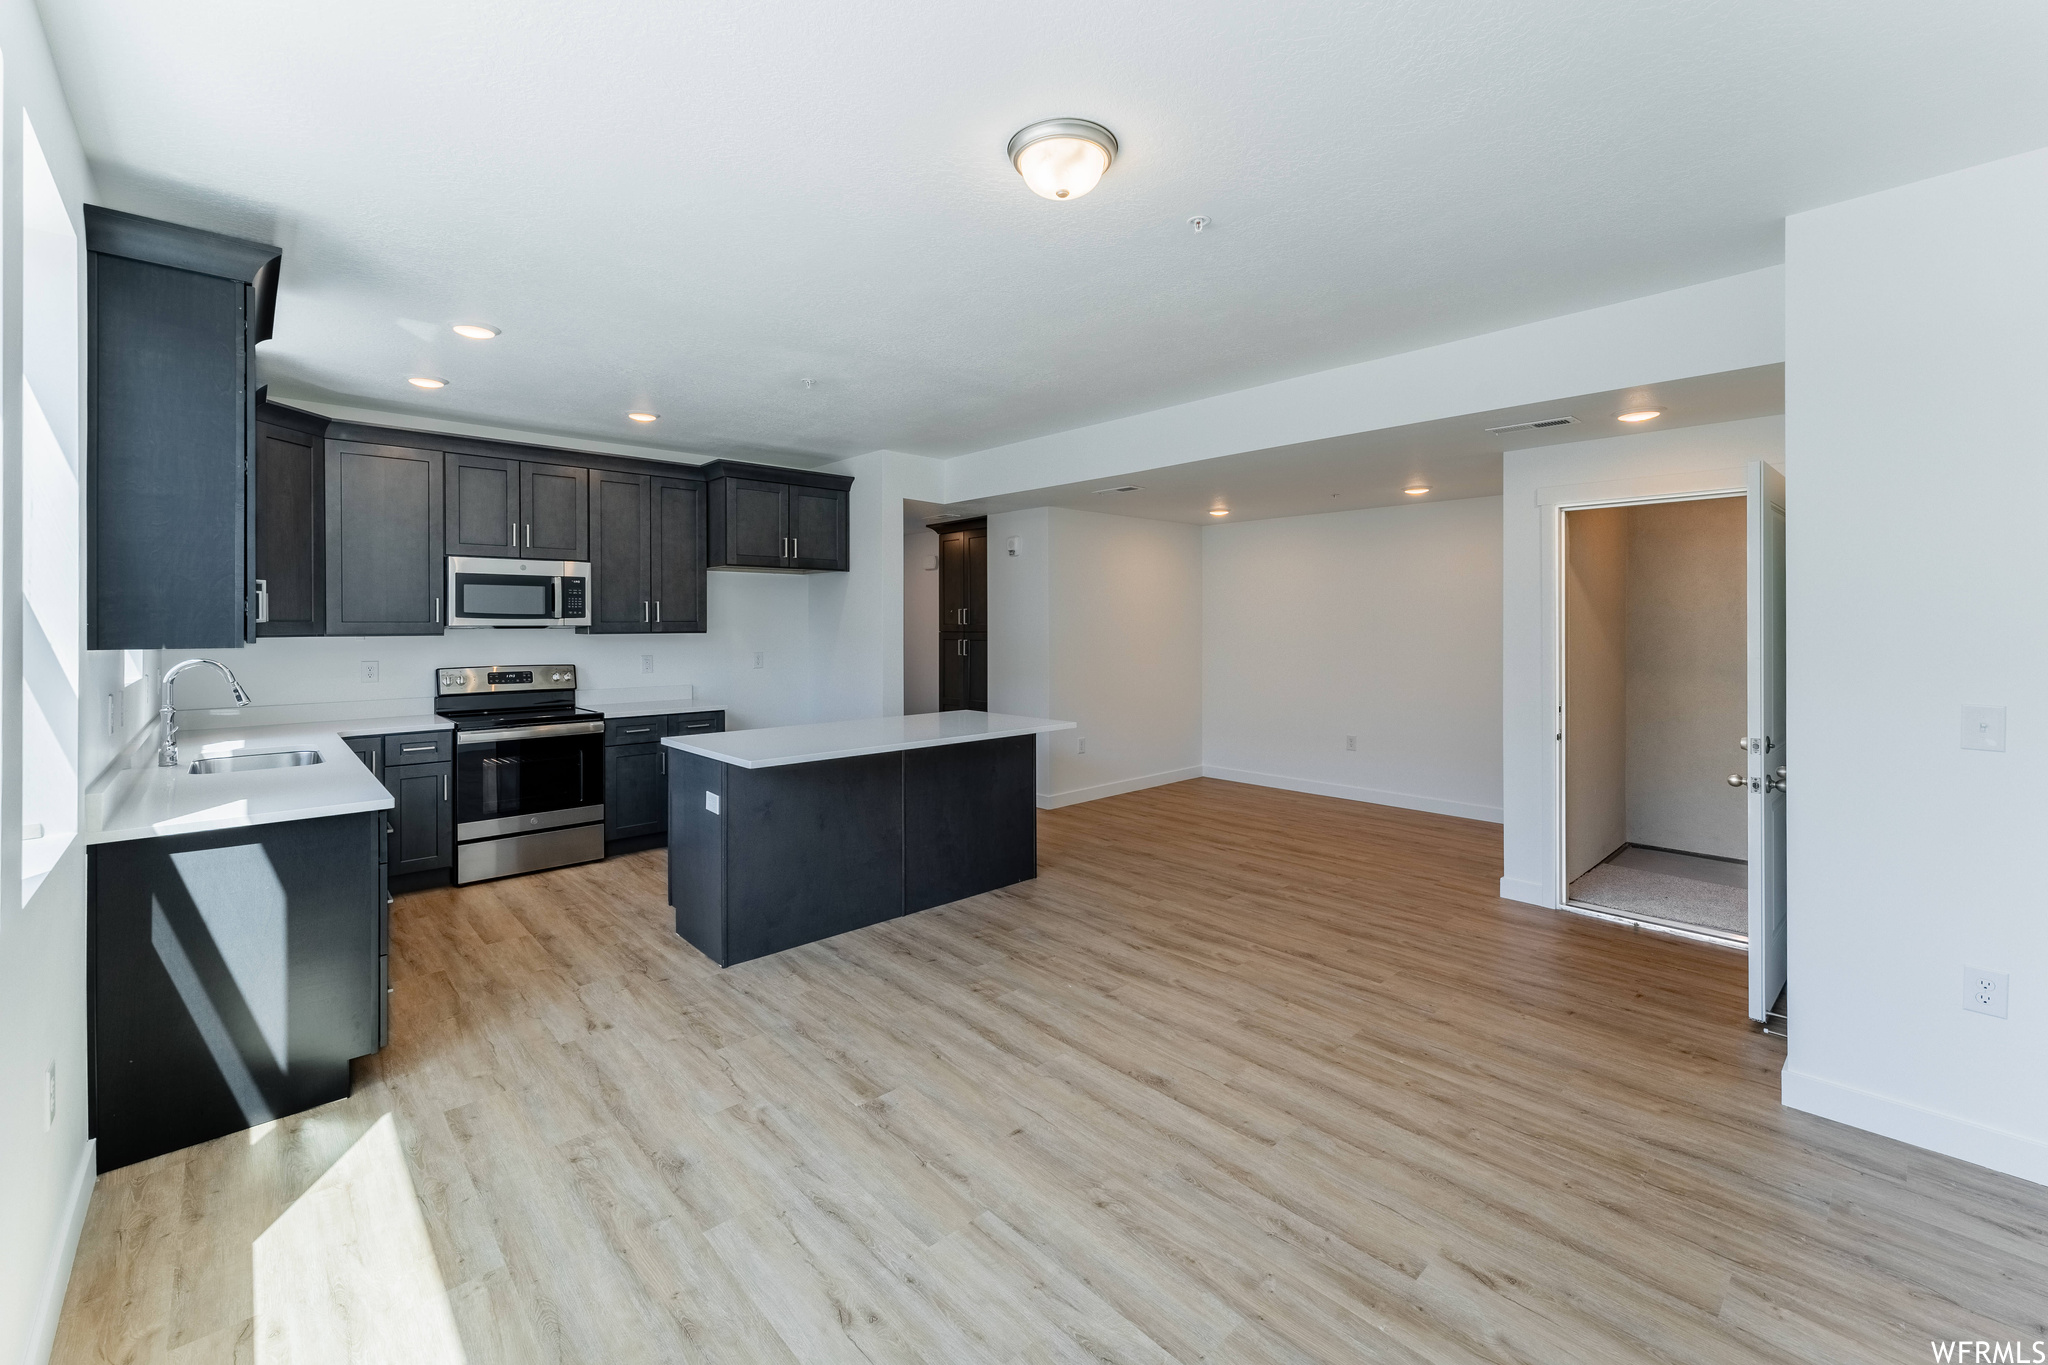 Kitchen with a center island, sink, appliances with stainless steel finishes, and light hardwood / wood-style floors